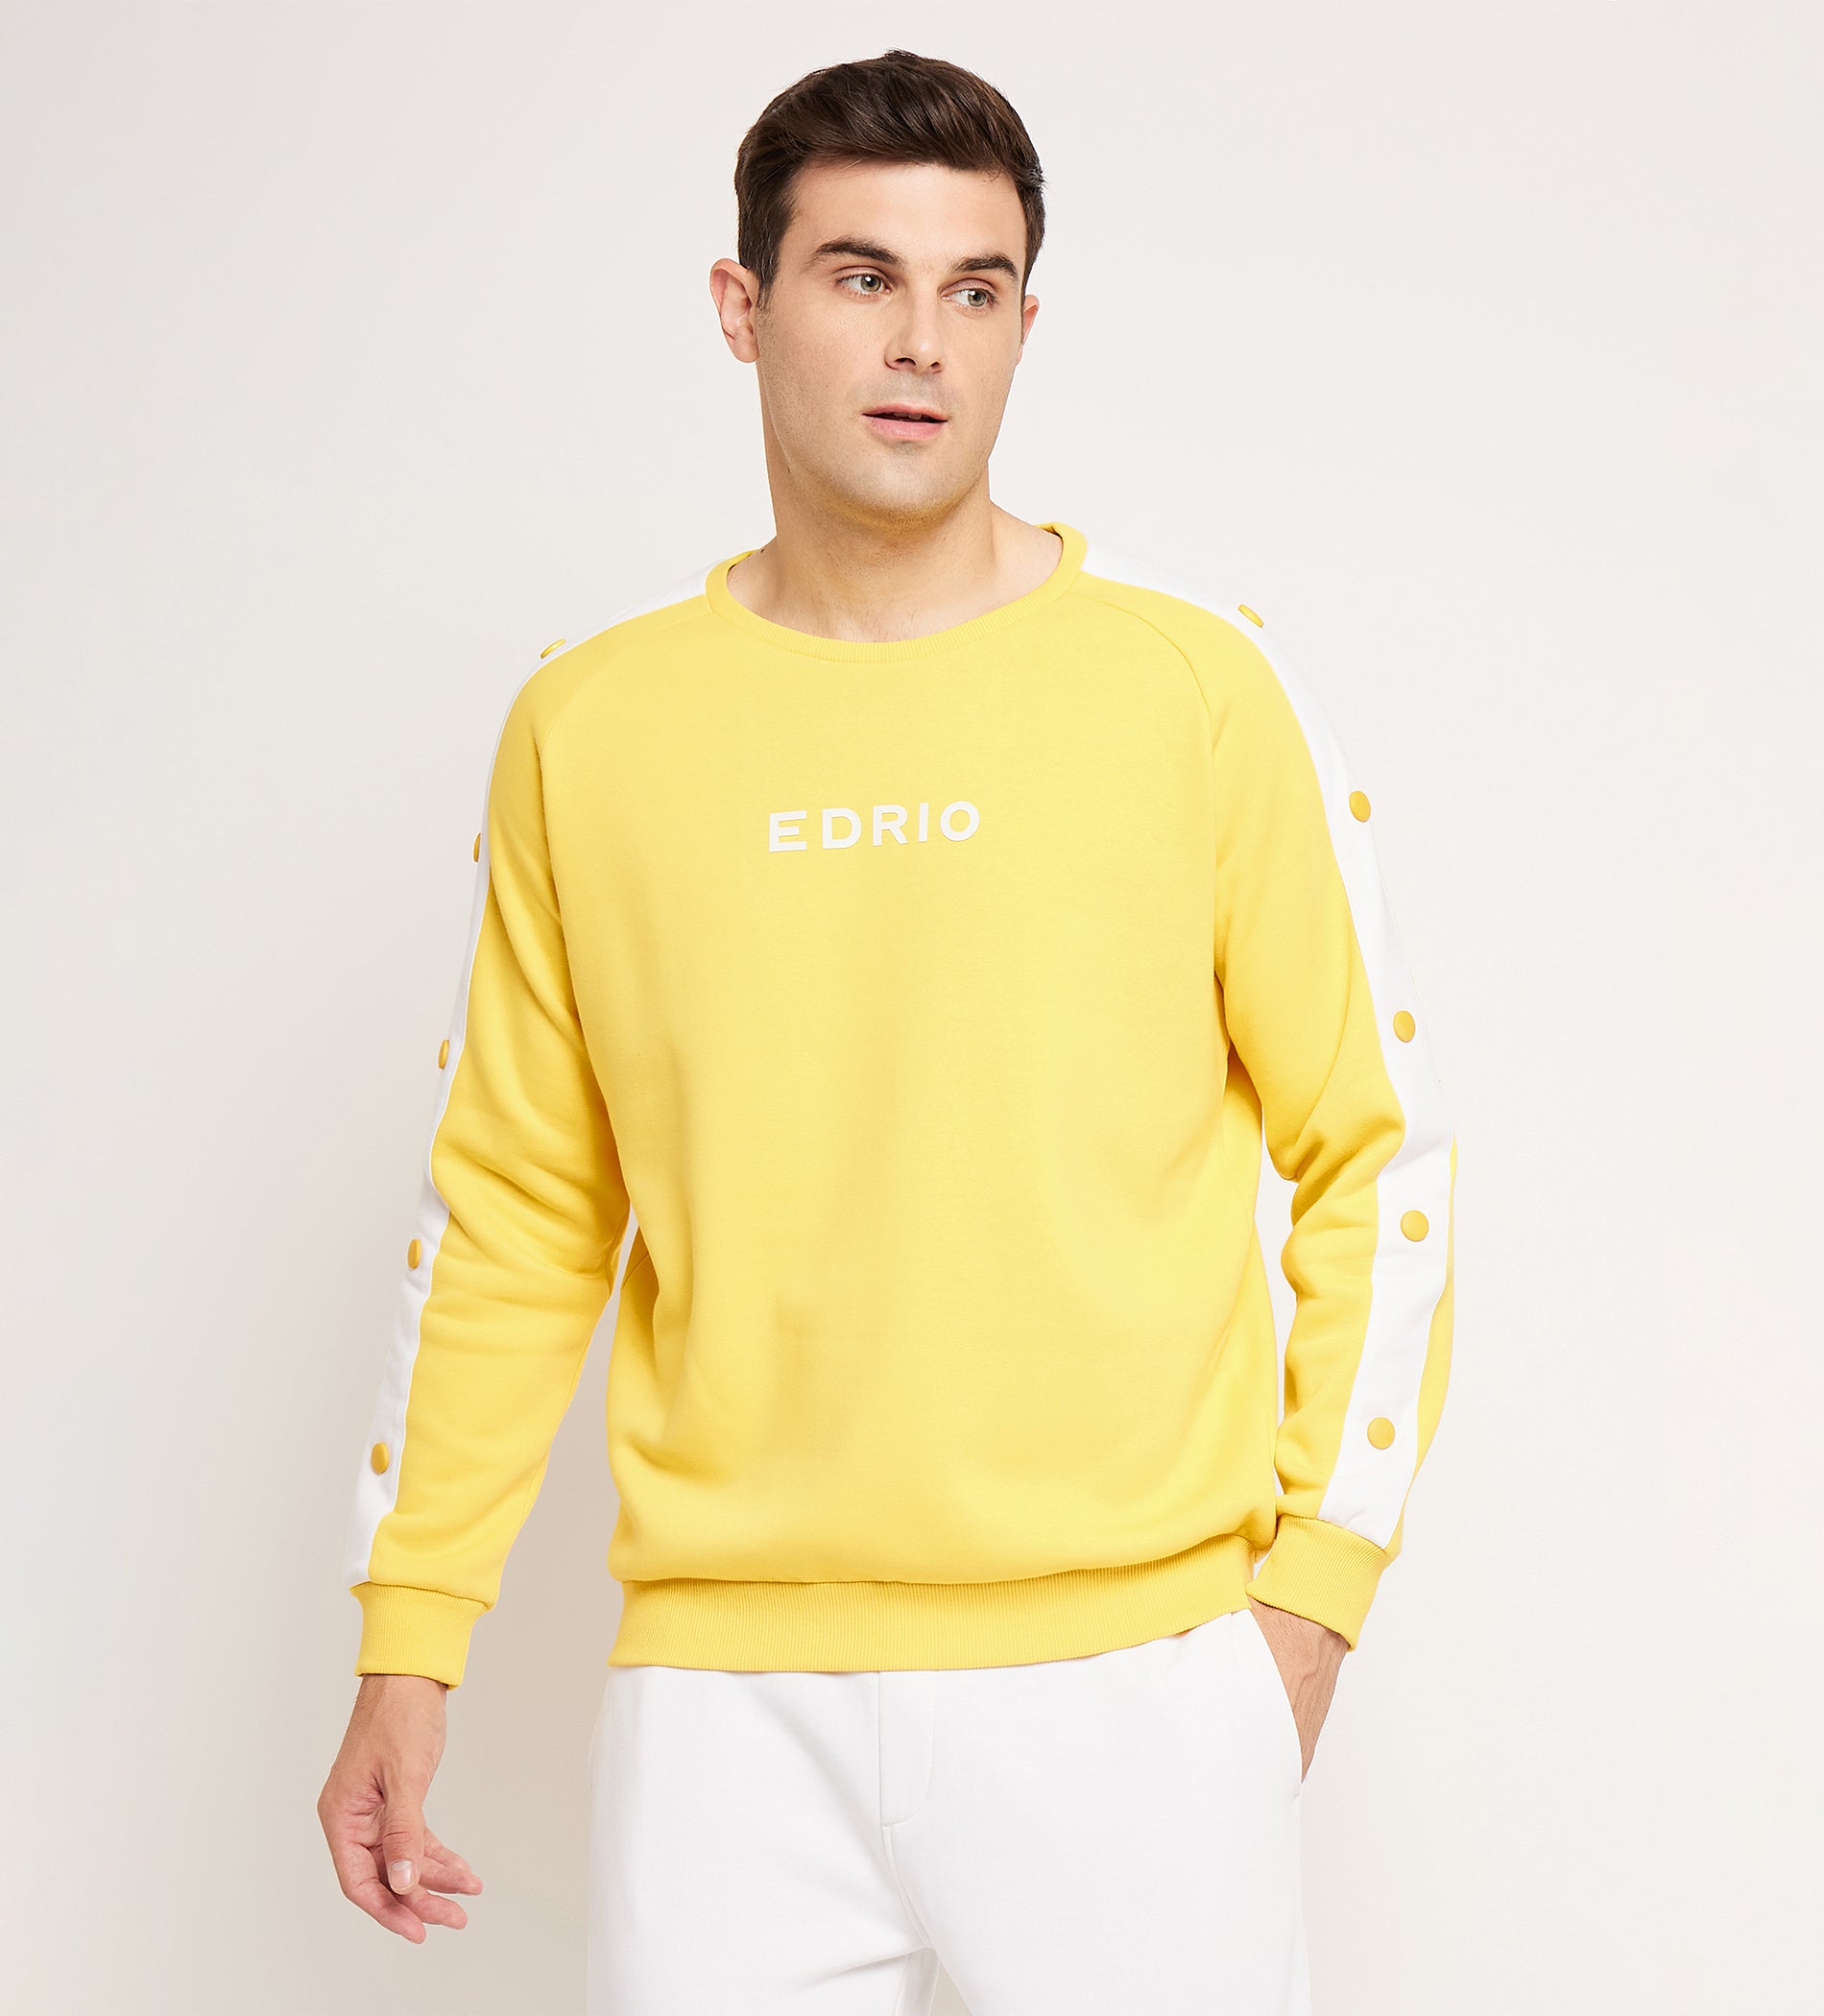 Radiant Yellow Sweatshirt with Snap Button Sleeve Accents